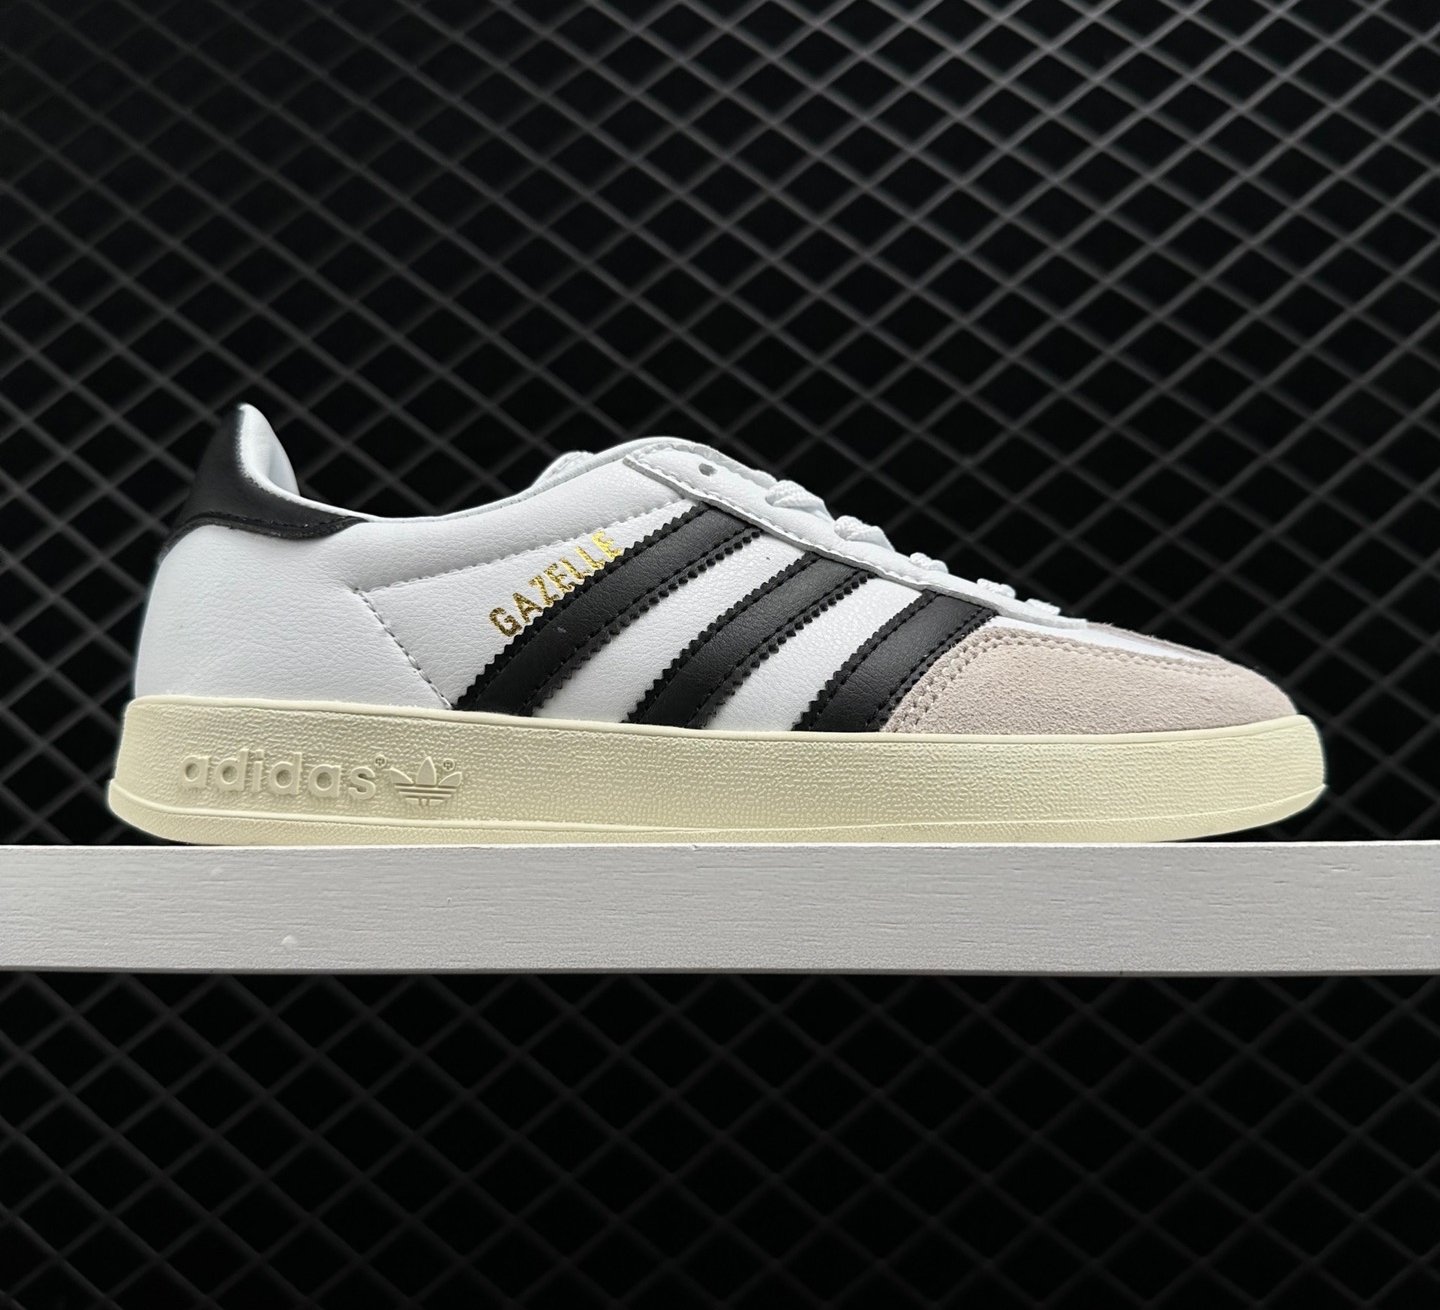 Adidas Gazelle Indoor - White Black: Classic Sneakers for Style & Comfort